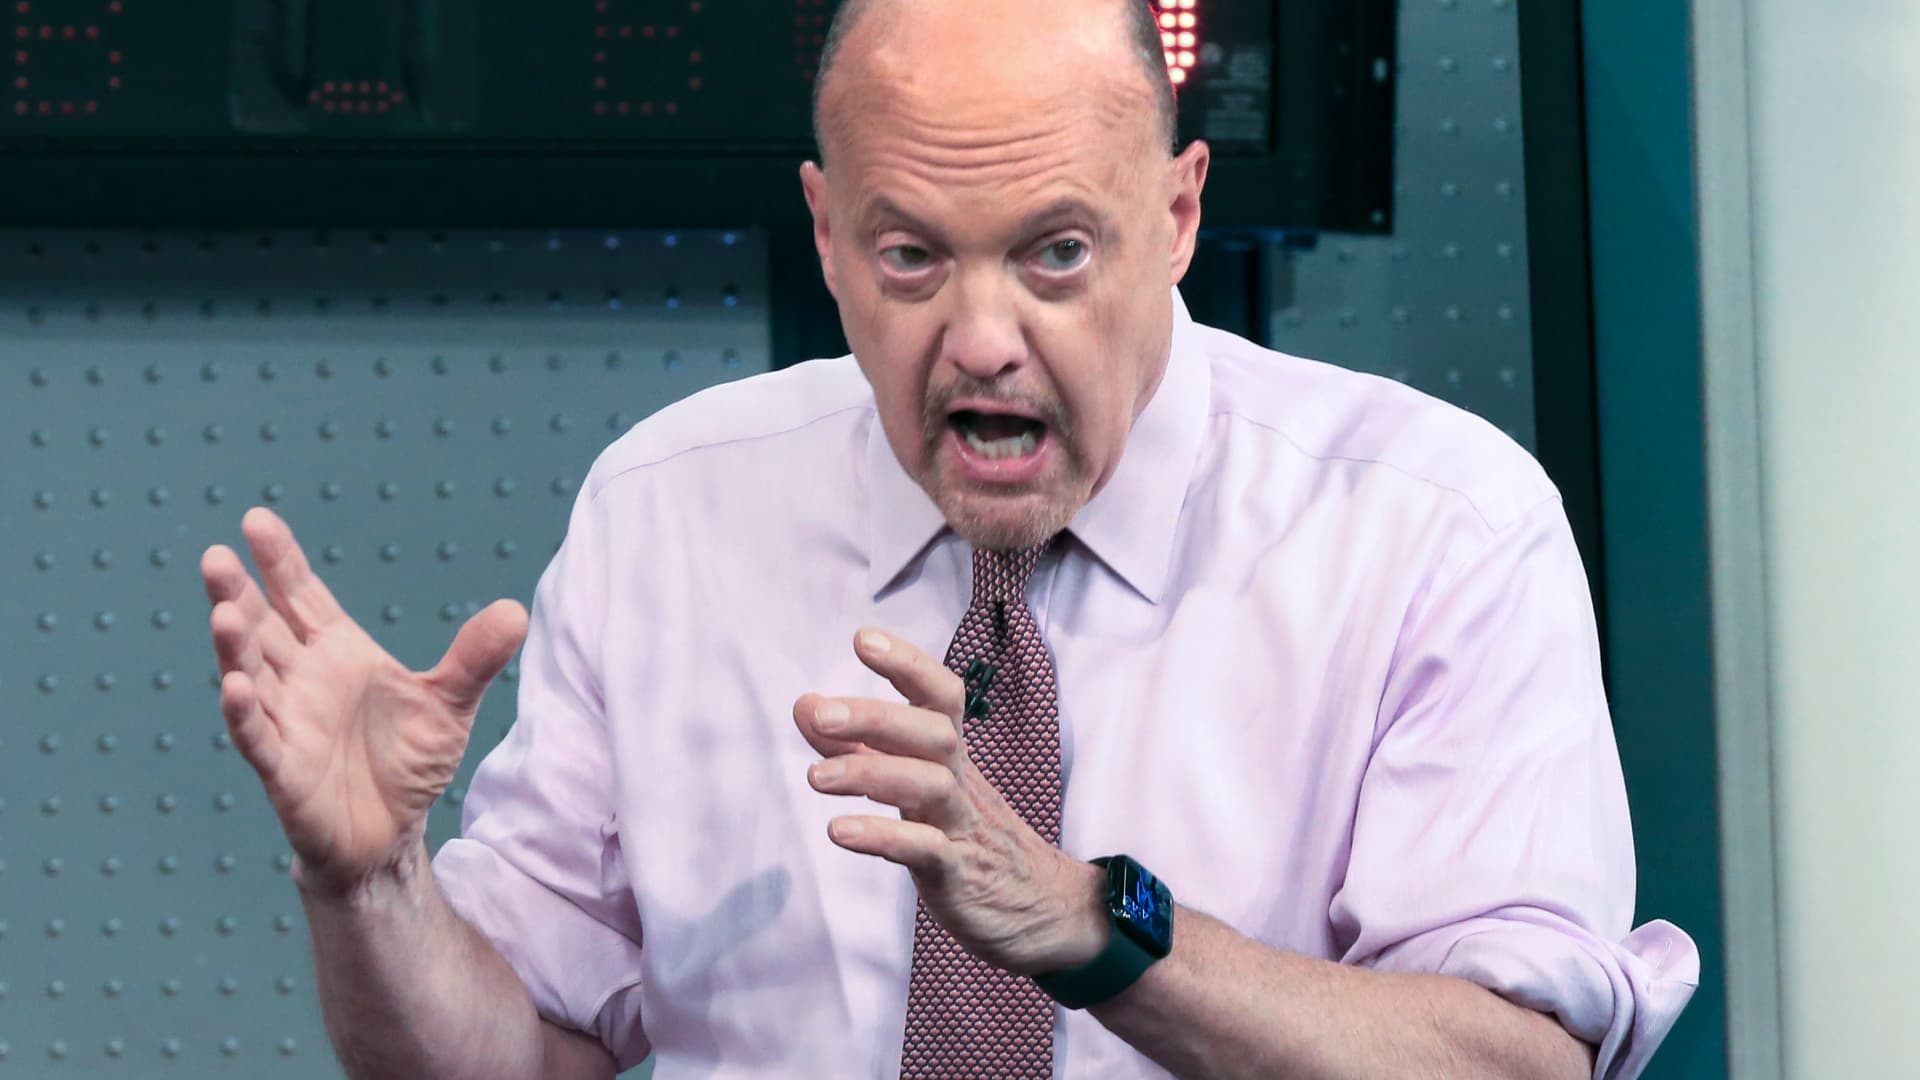 Jim Cramer says to hold on to these 3 cloud stocks and sell the rest